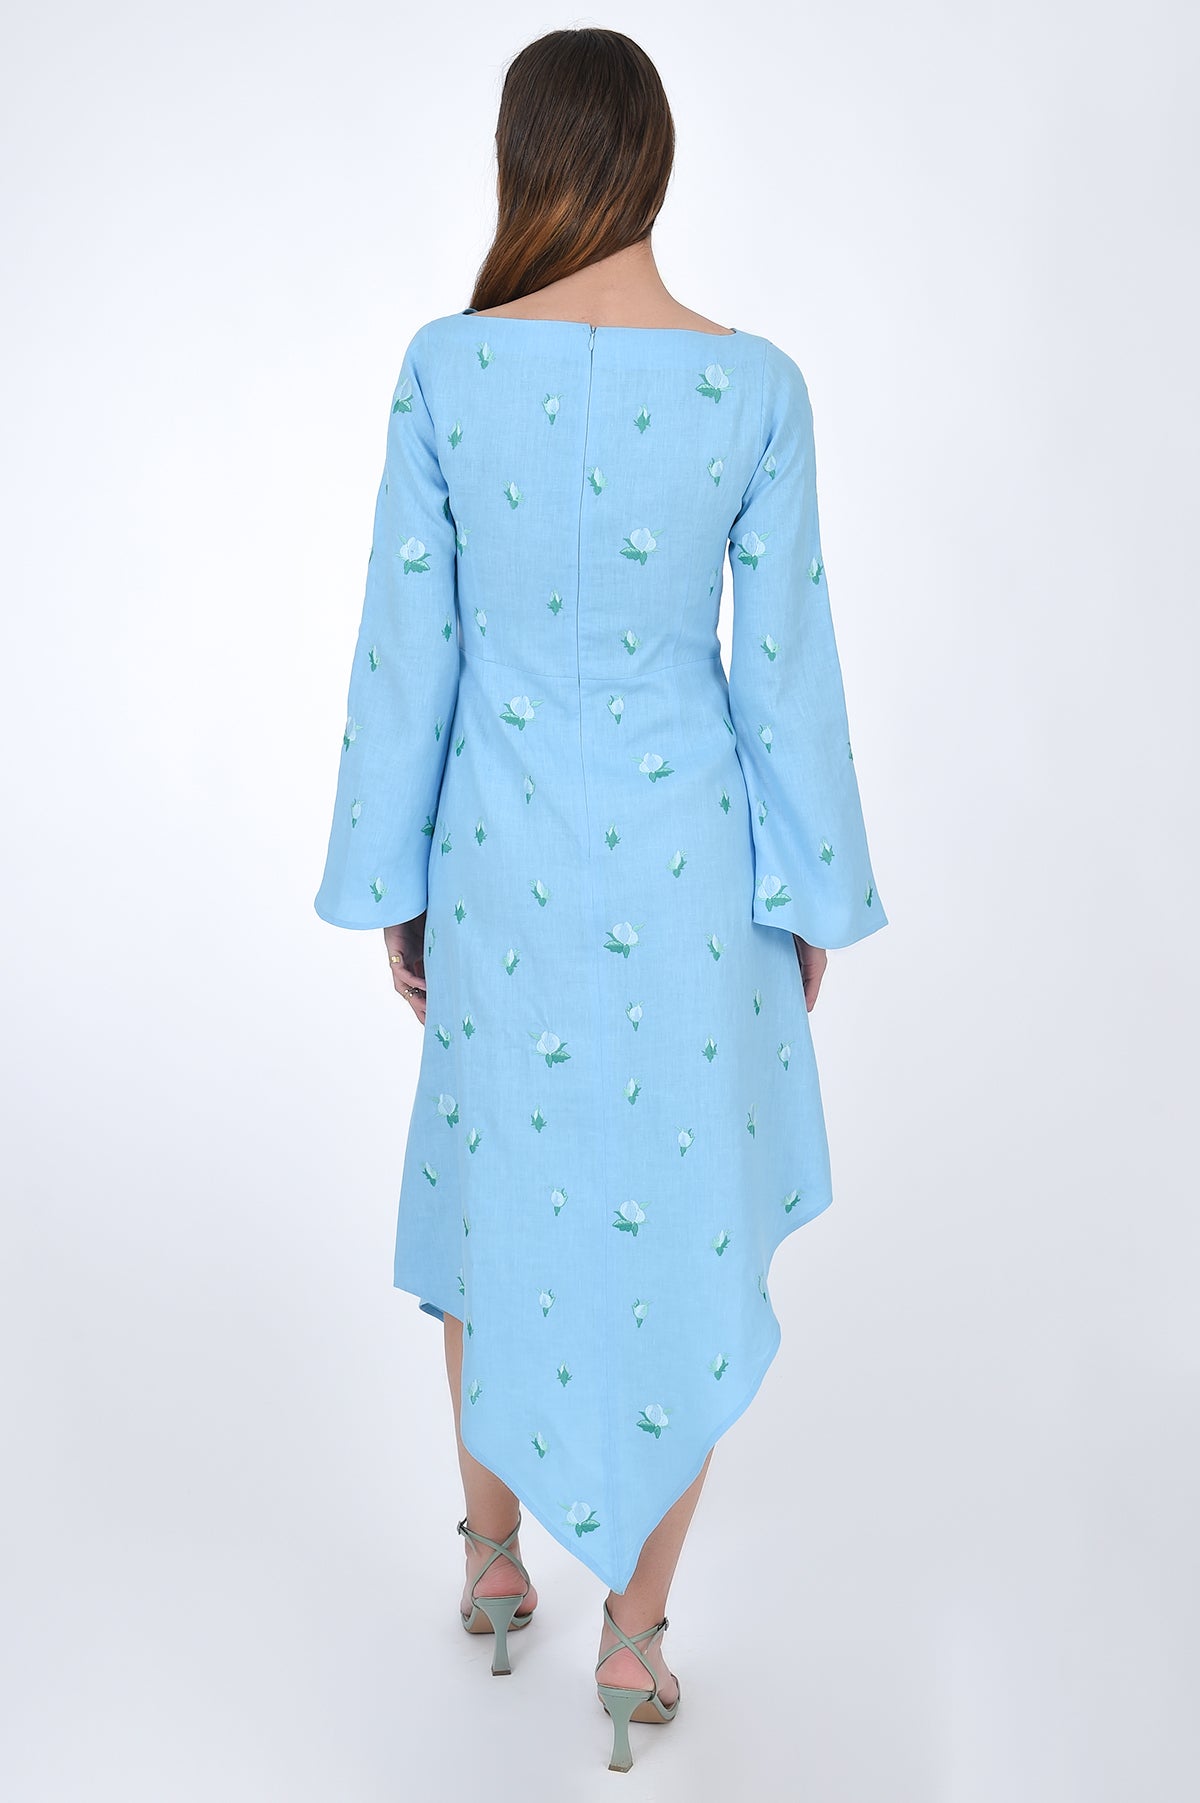 Fanm Mon Choupet Asymmetrical Linen dress, back view.  Features long bell sleeves,  a boat neckline and hits mid length. Detailed with intricate floral-inspired embroidery a Fanm Mon signature. 